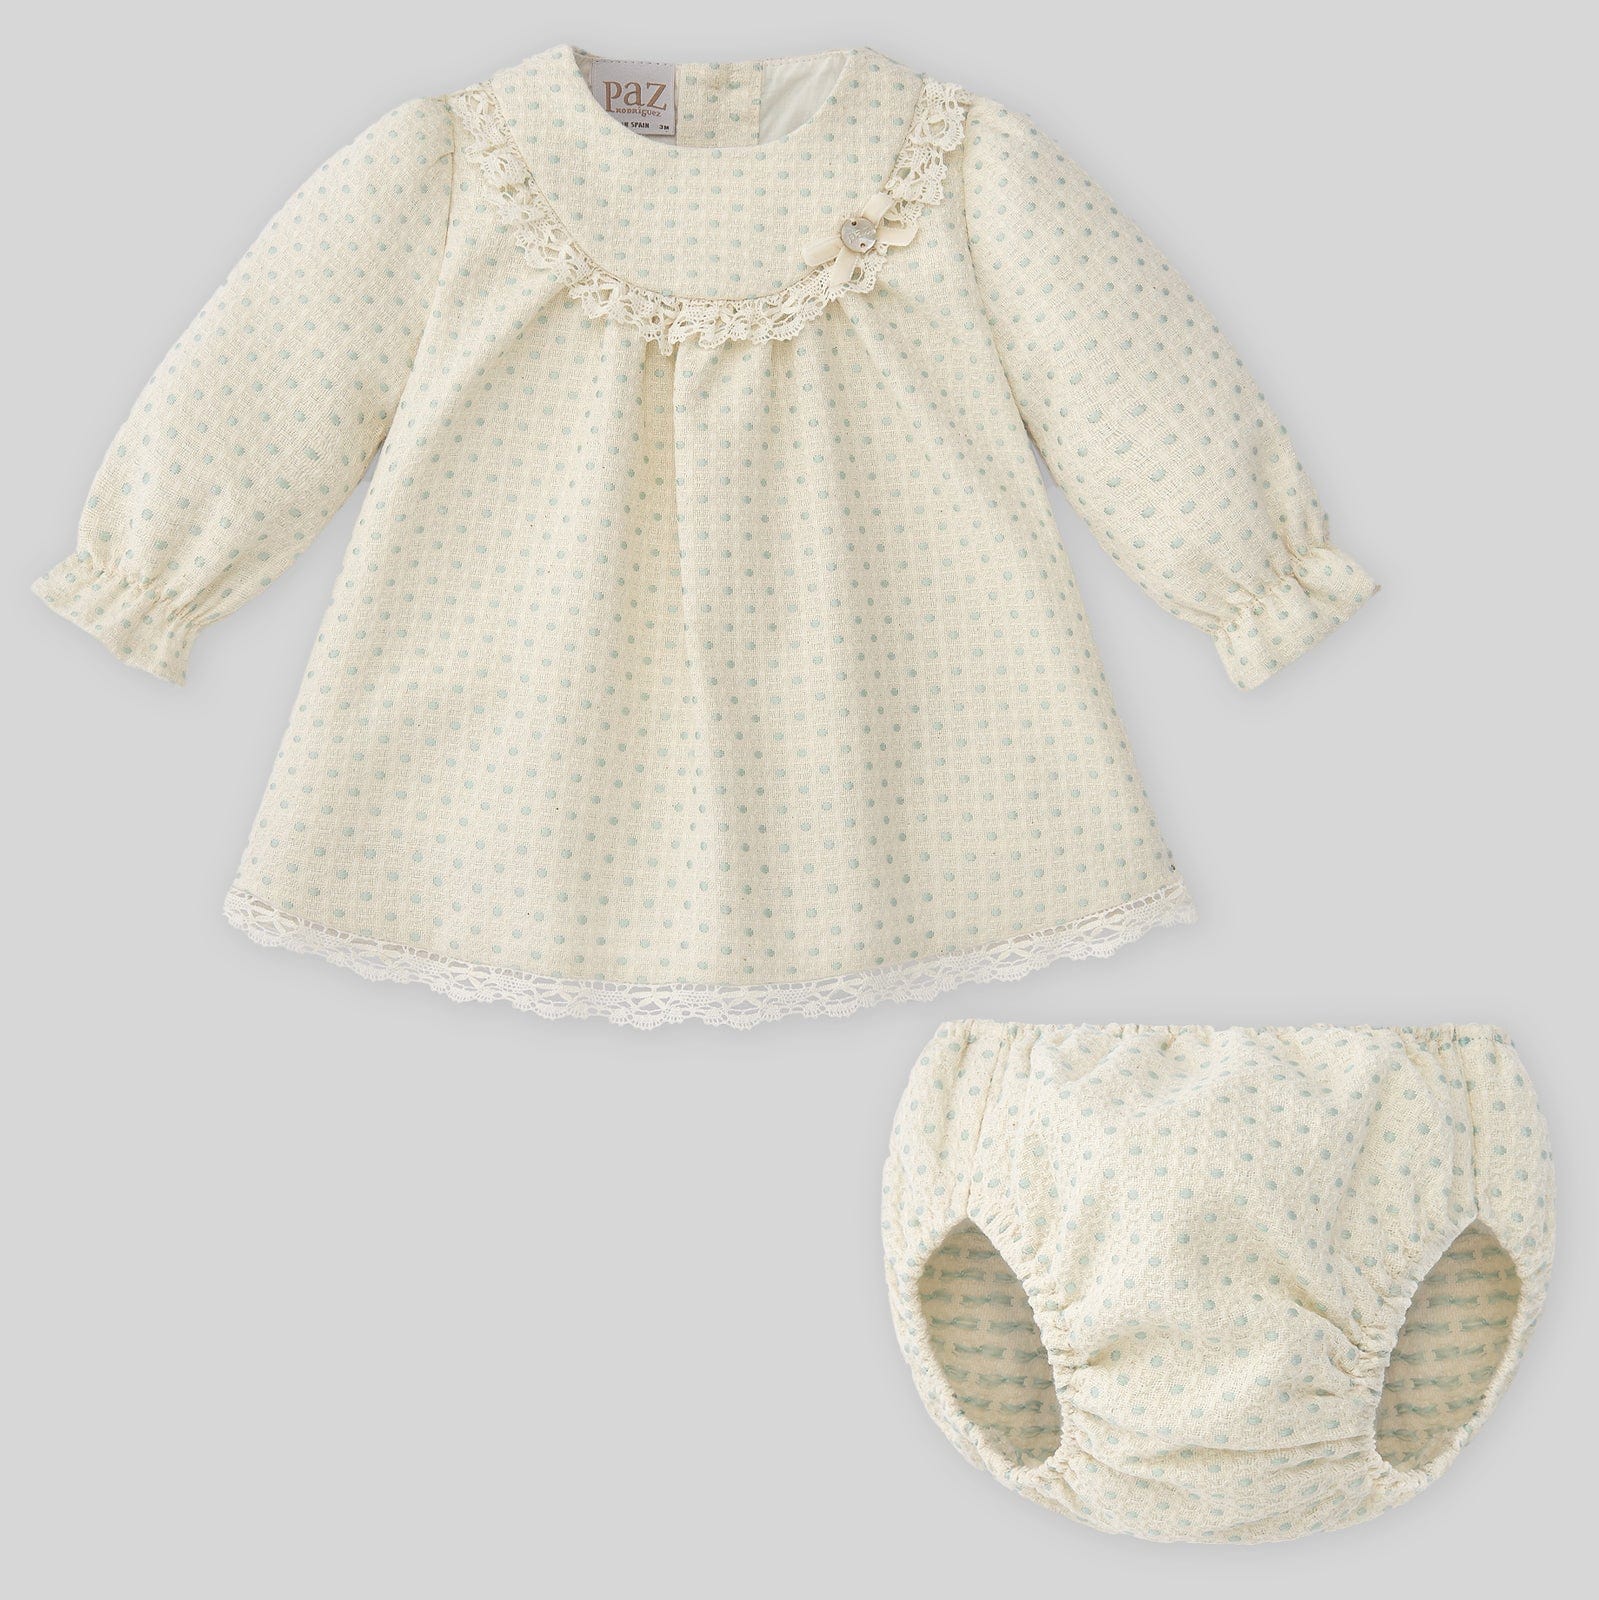 Paz Rodriguez Dresses 3m Paz Rodriguez Baby Girls Woven Dress and Bloomers Set